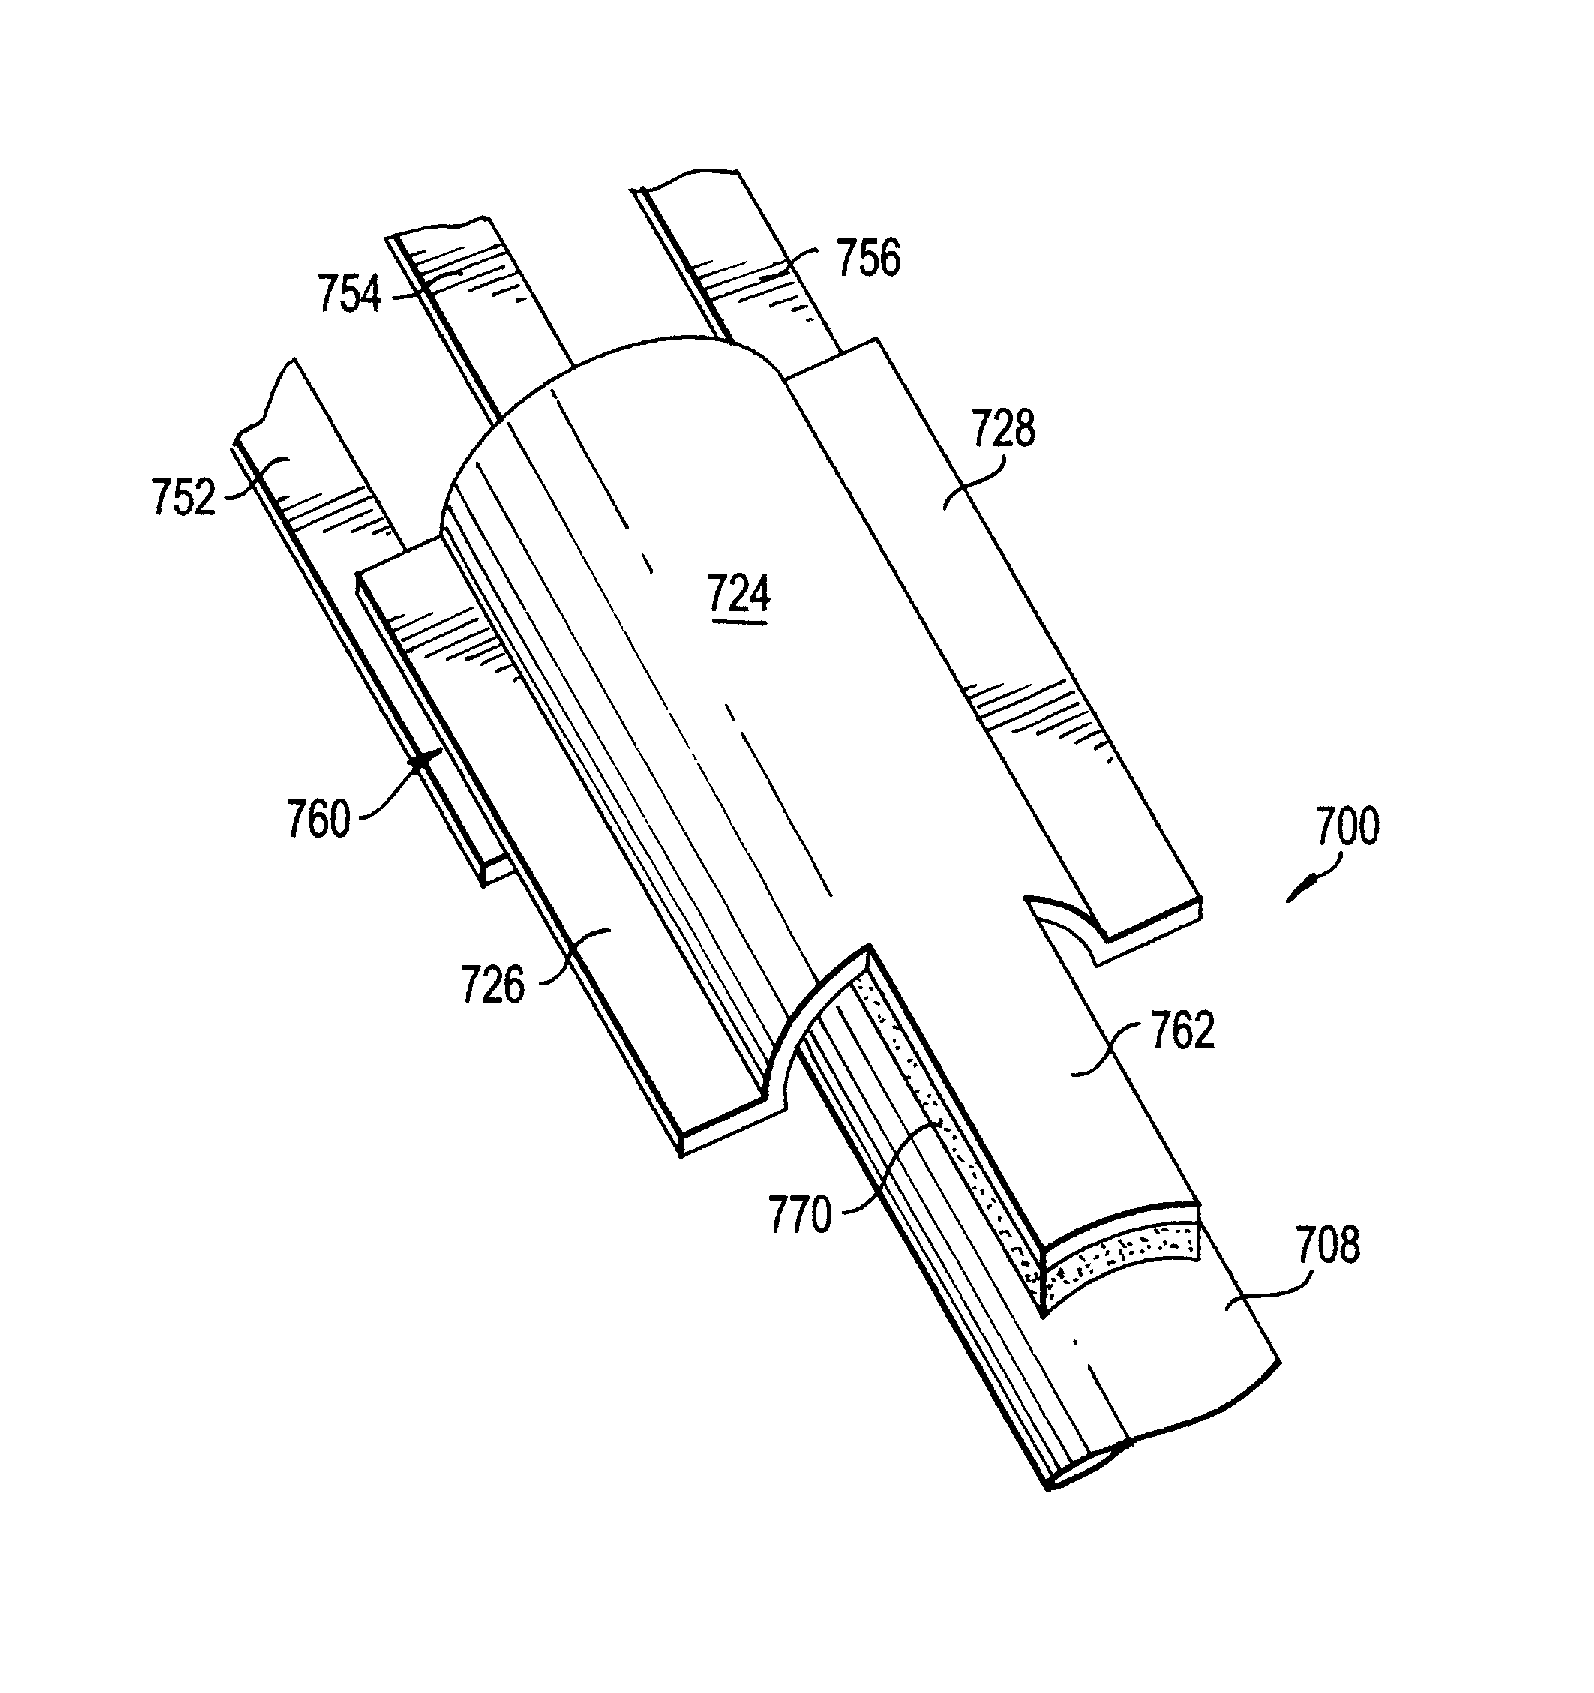 Ground sleeve having improved impedance control and high frequency performance